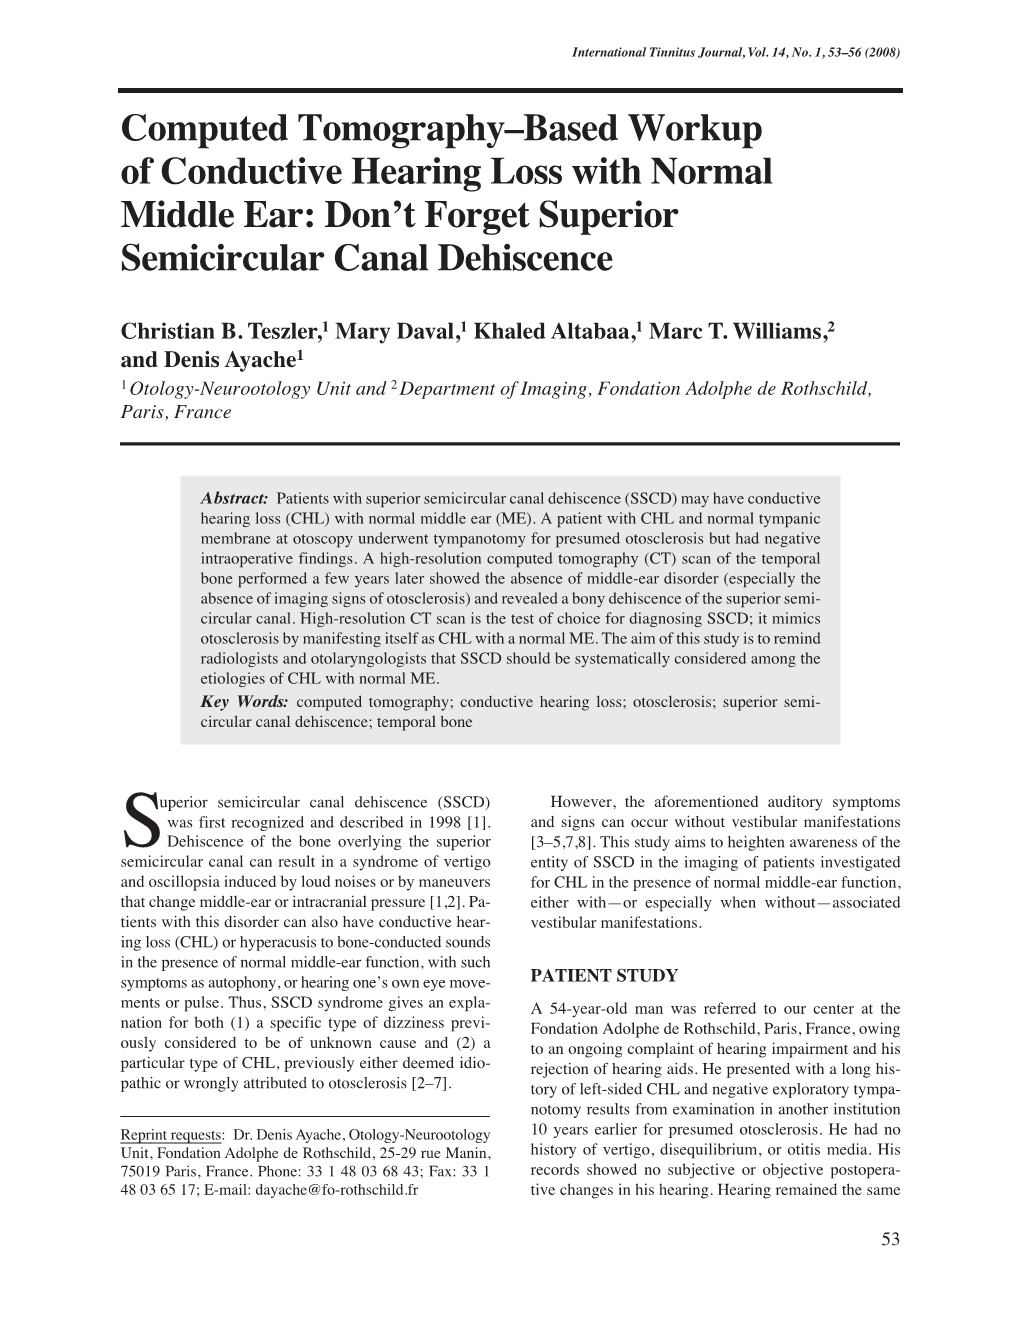 Computed Tomography–Based Workup of Conductive Hearing Loss with Normal Middle Ear: Don’T Forget Superior Semicircular Canal Dehiscence